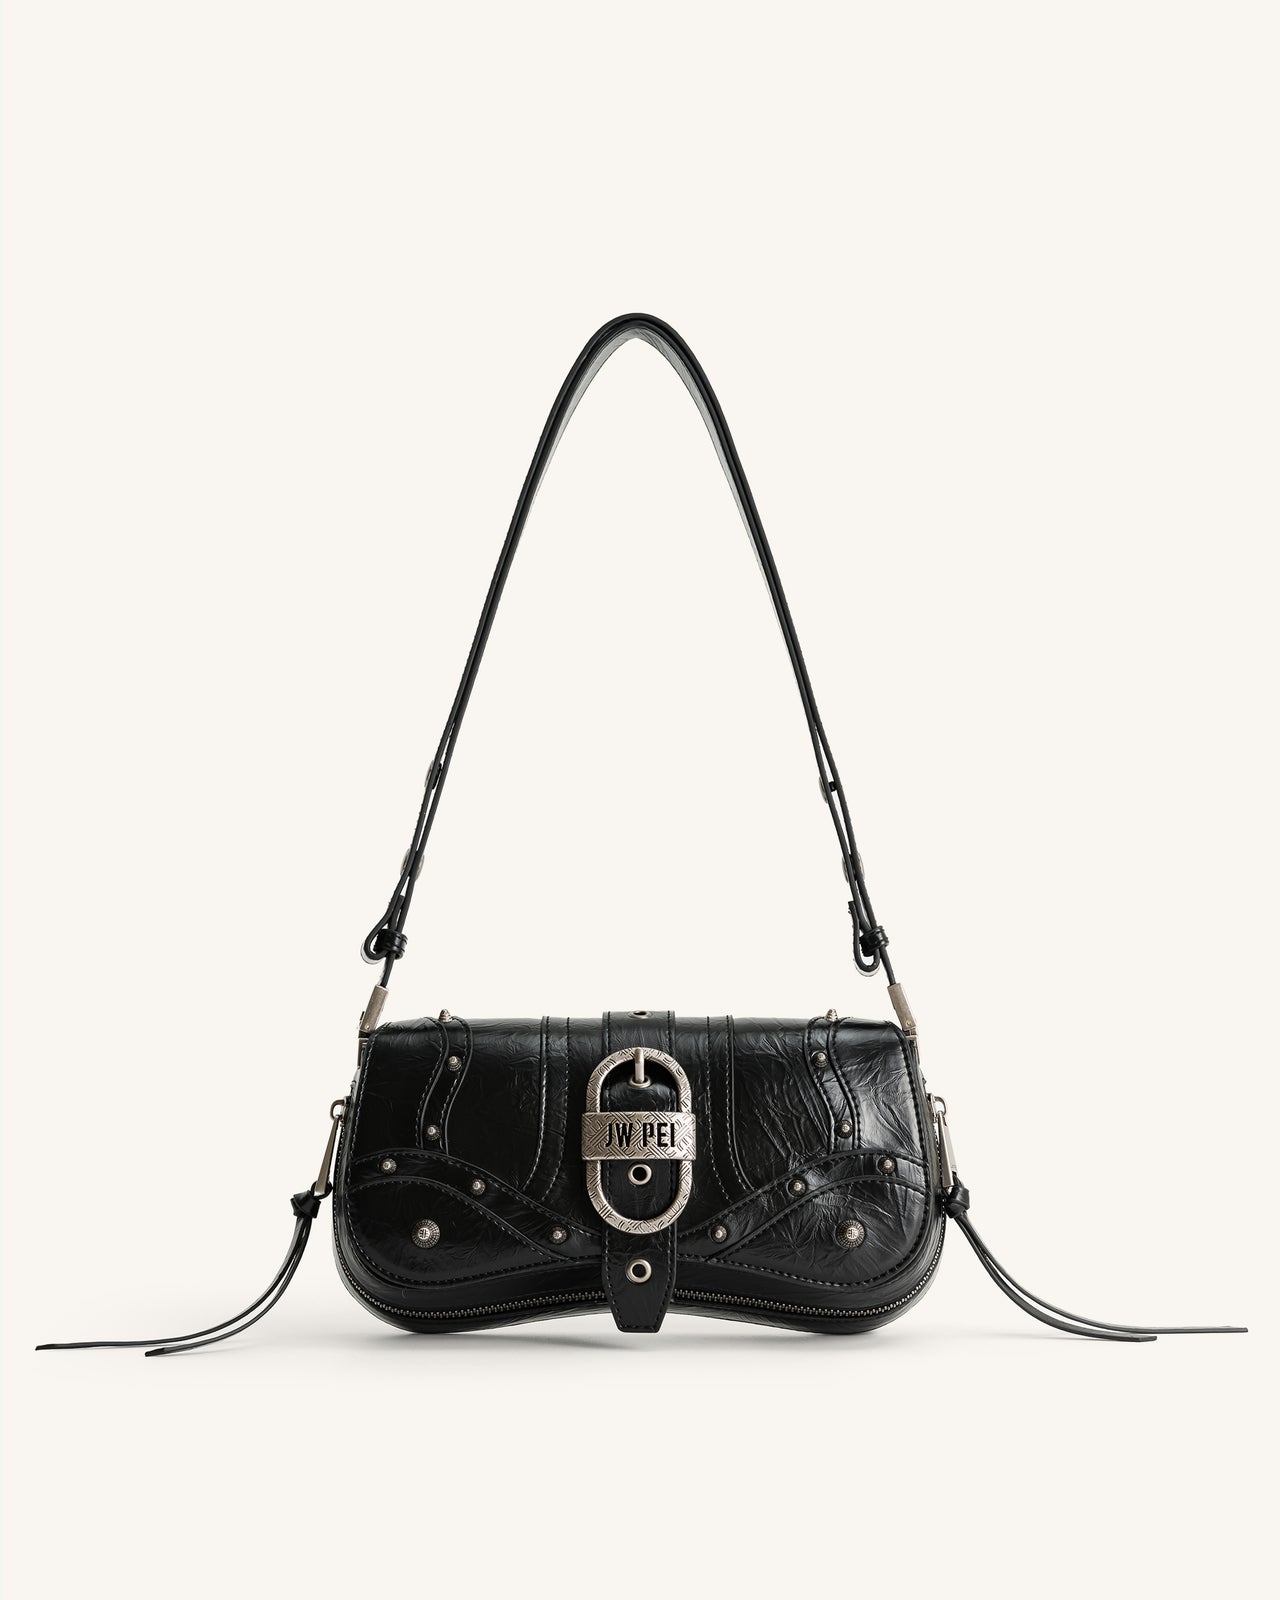 Tina Quilted Chain Crossbody - Black Online Shopping - JW Pei